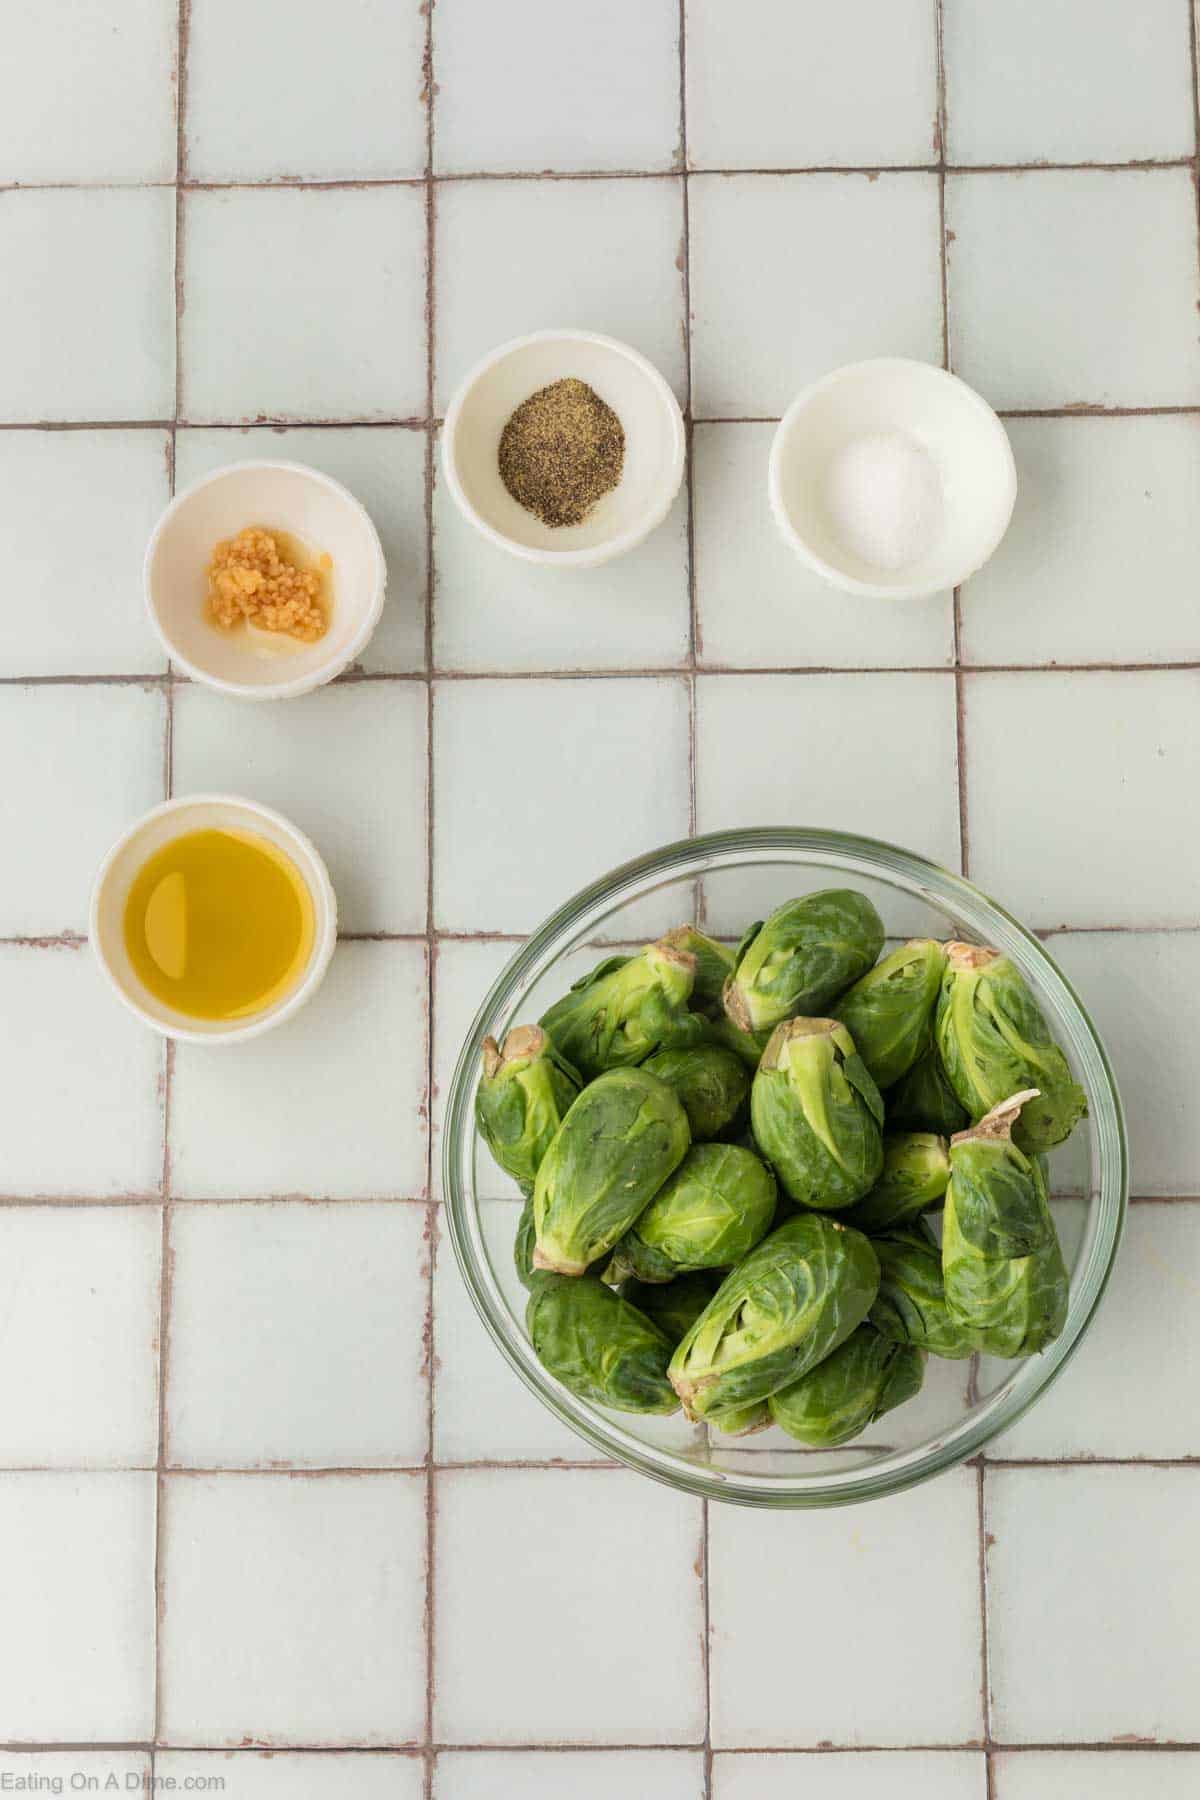 A glass bowl filled with Brussels sprouts is centered on a tiled surface. Surrounding the bowl are small white dishes containing chopped garlic, black pepper, salt, and olive oil—perfect for prepping an air fryer Brussels sprouts recipe. The layout appears to be for a cooking preparation.